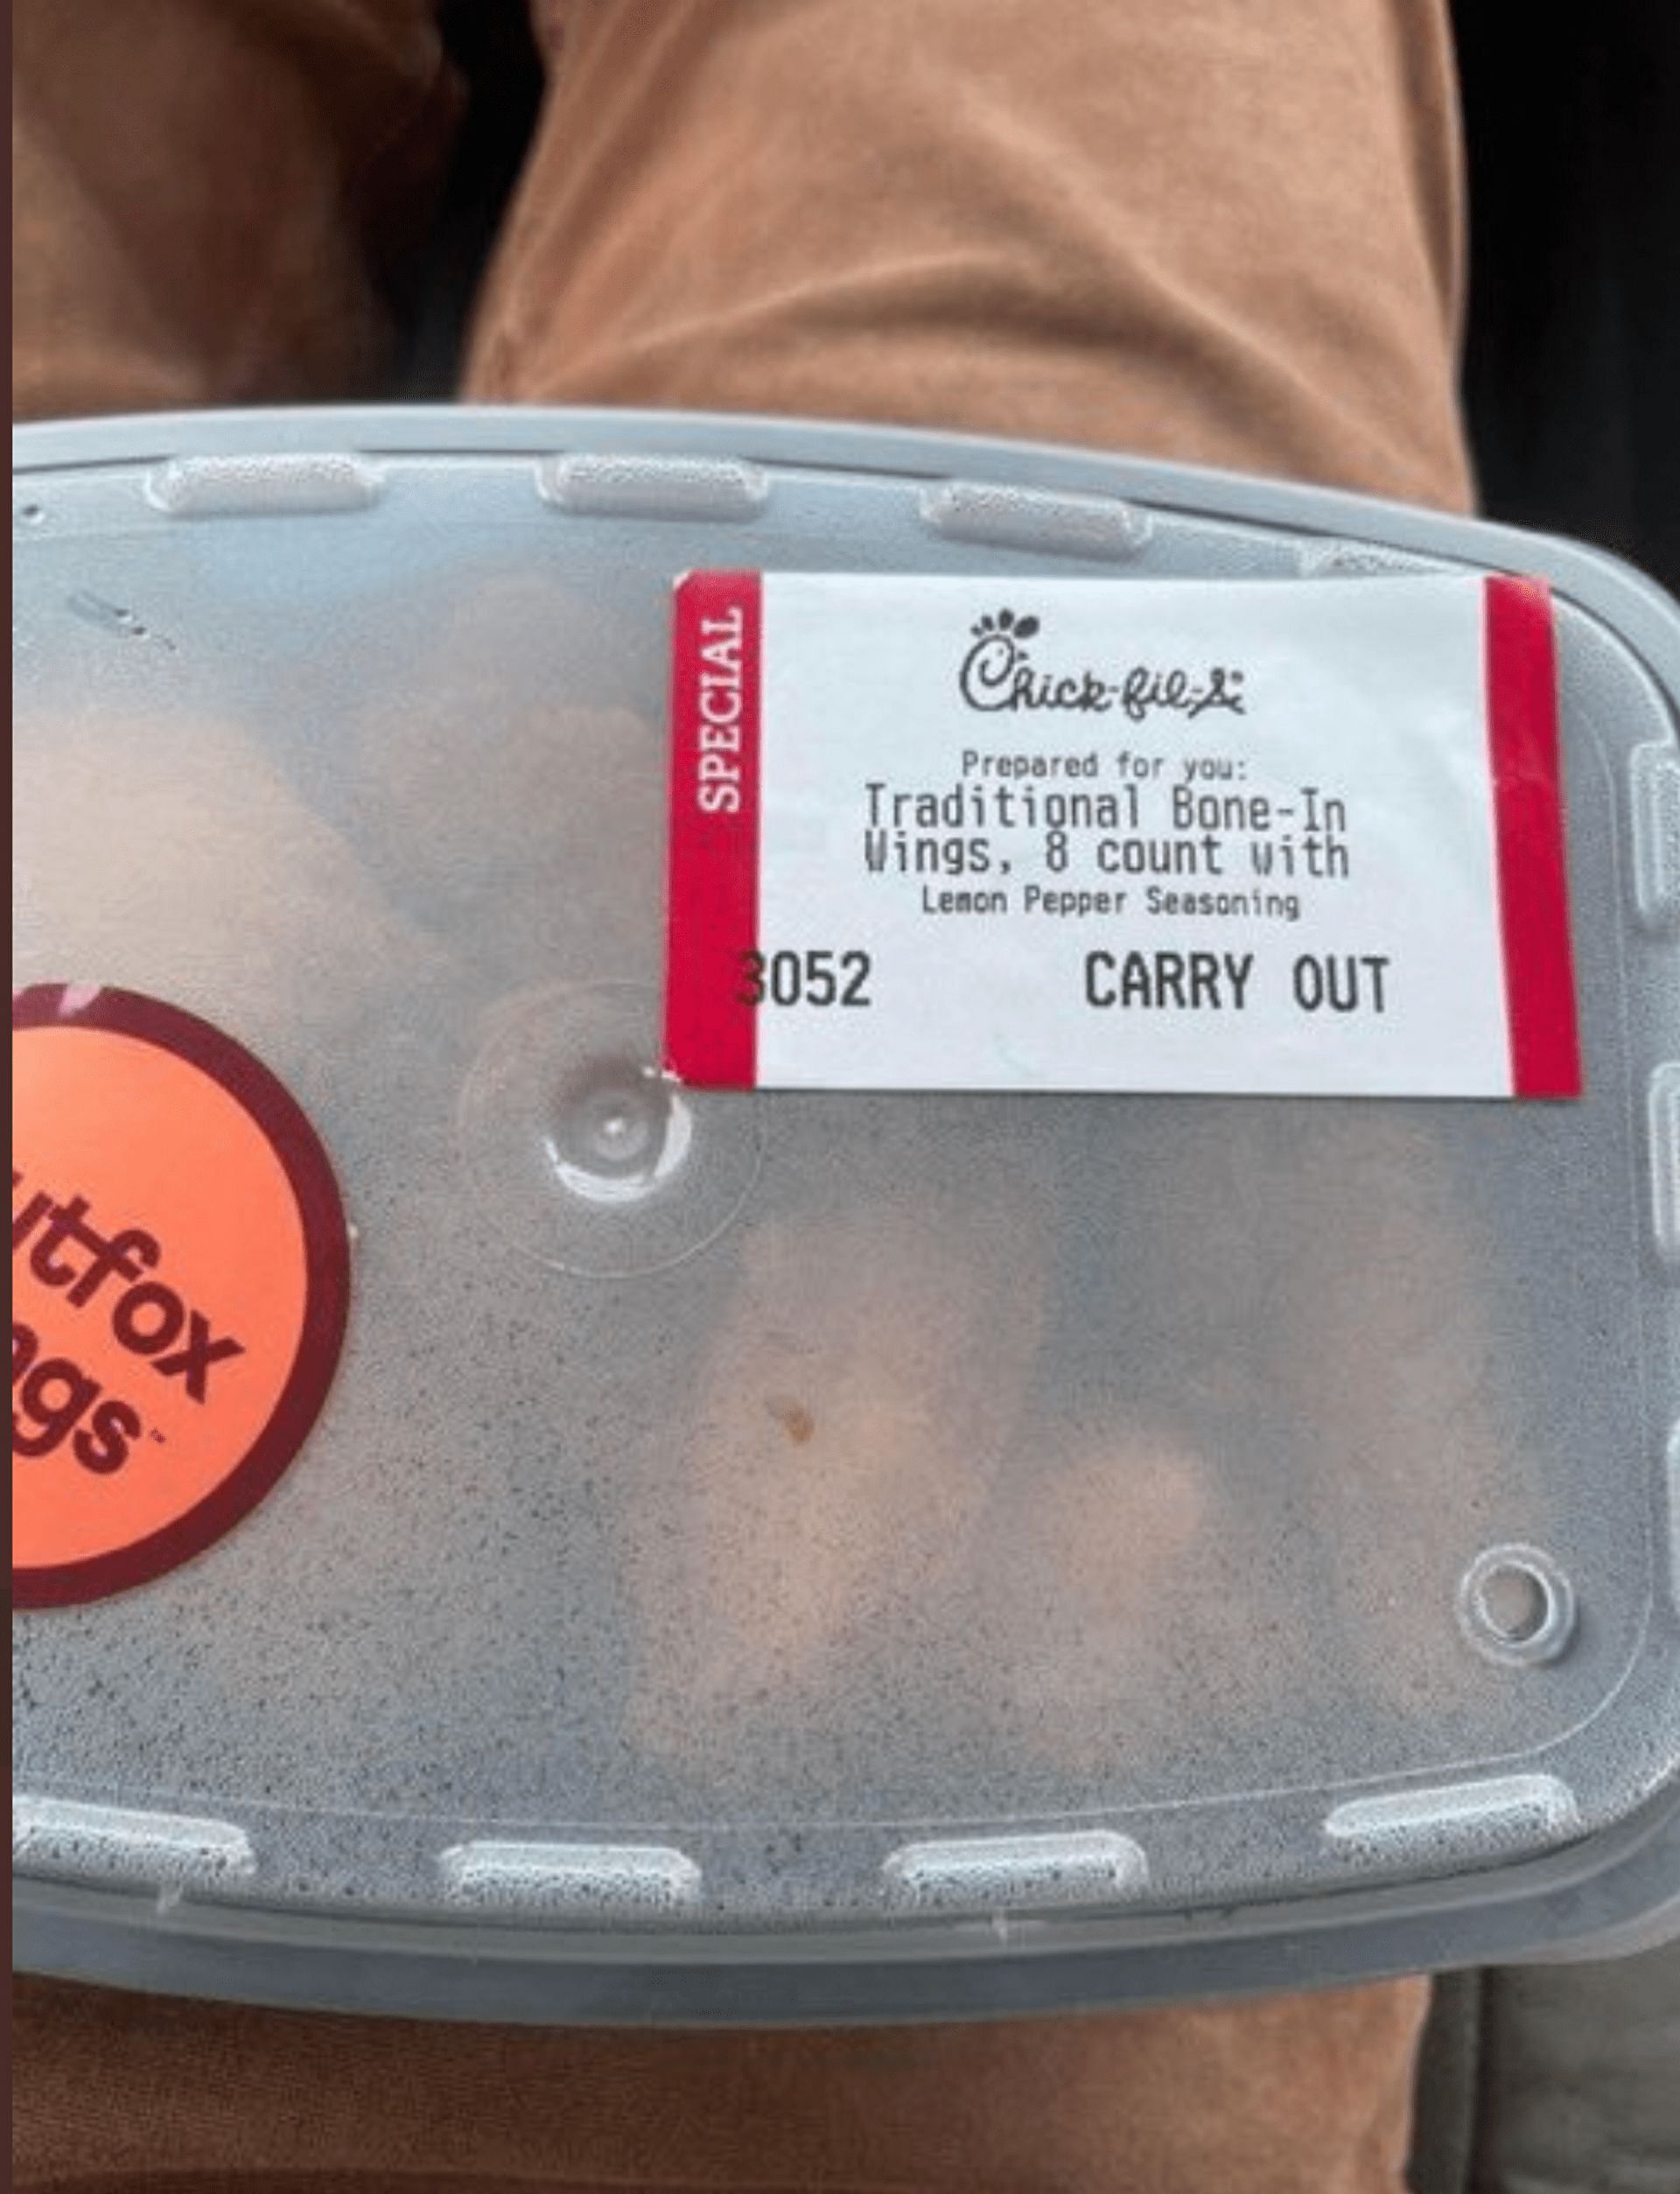 Wings allegedly sold by Chick-fil-A says &quot;Special&quot; on the label. (Image via @EverythingGeorgia/ Twitter)